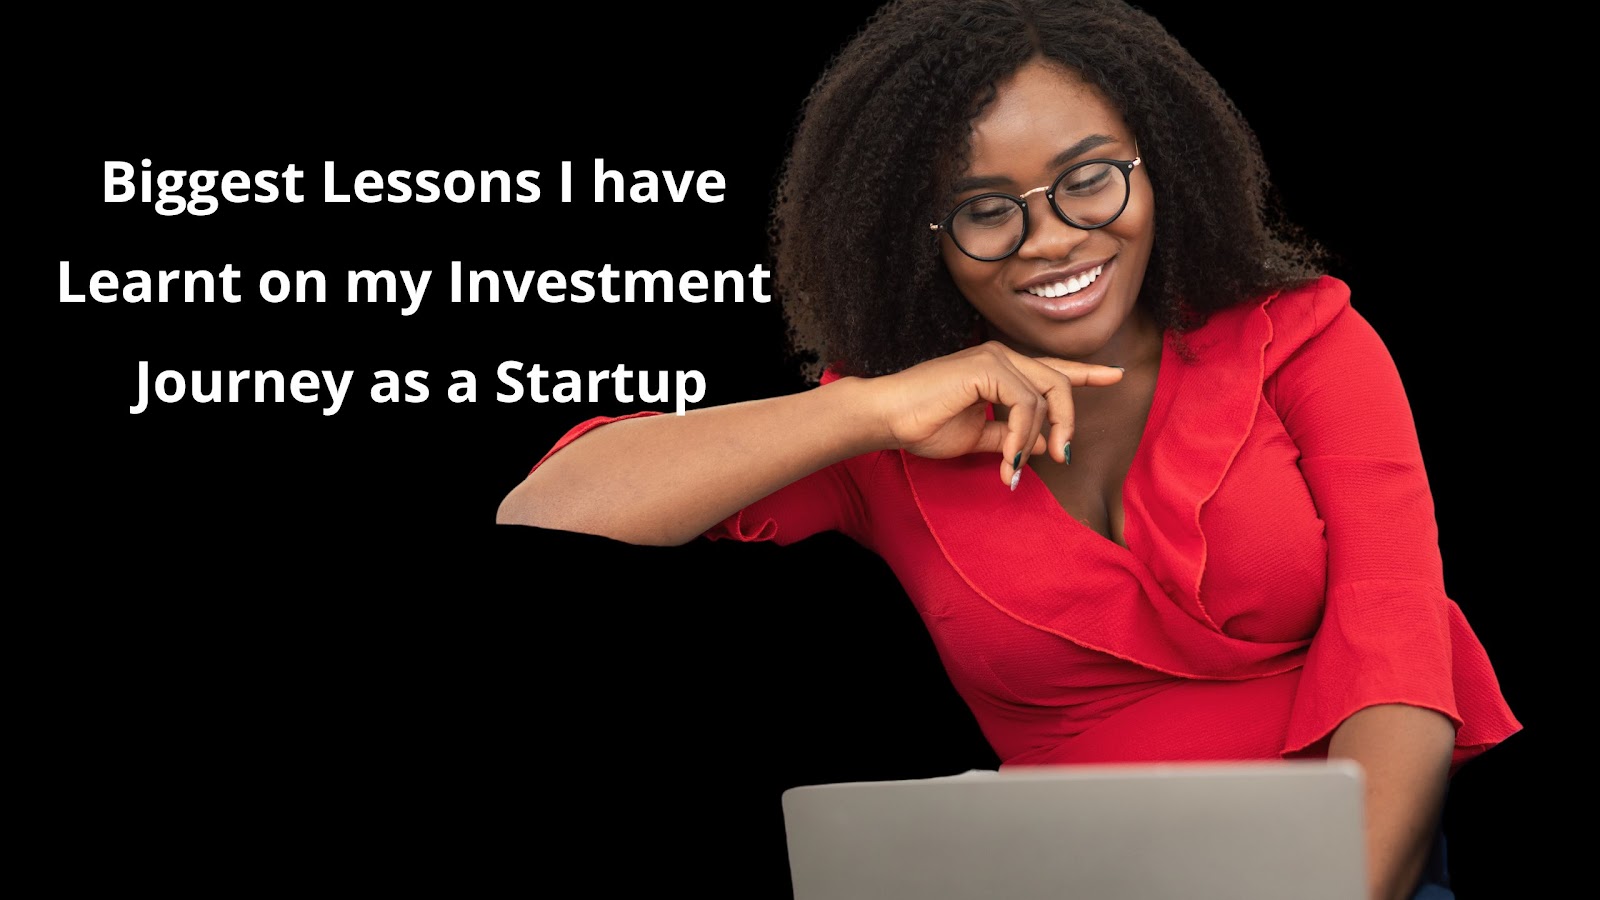 Investment lessons by Christiana Chidinma